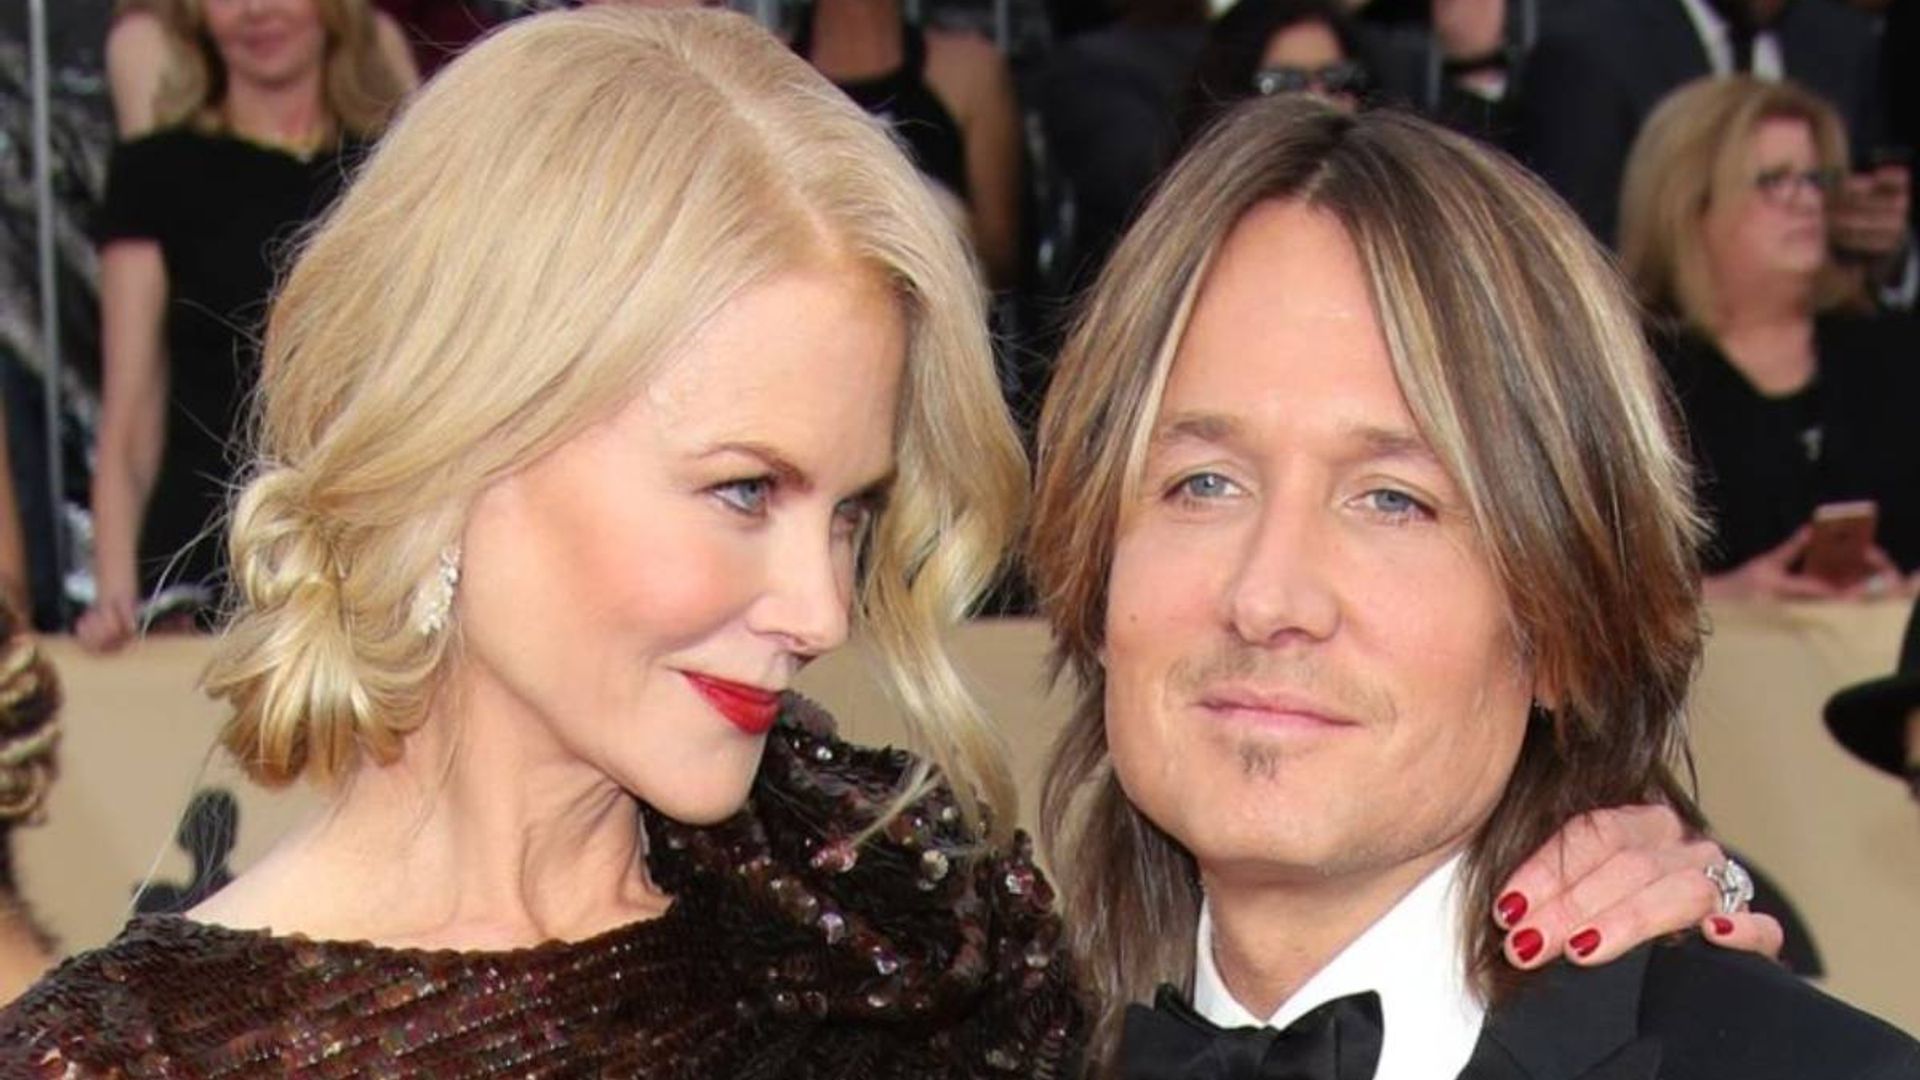 Keith Urban delights with unexpected duet hopes with Nicole Kidman